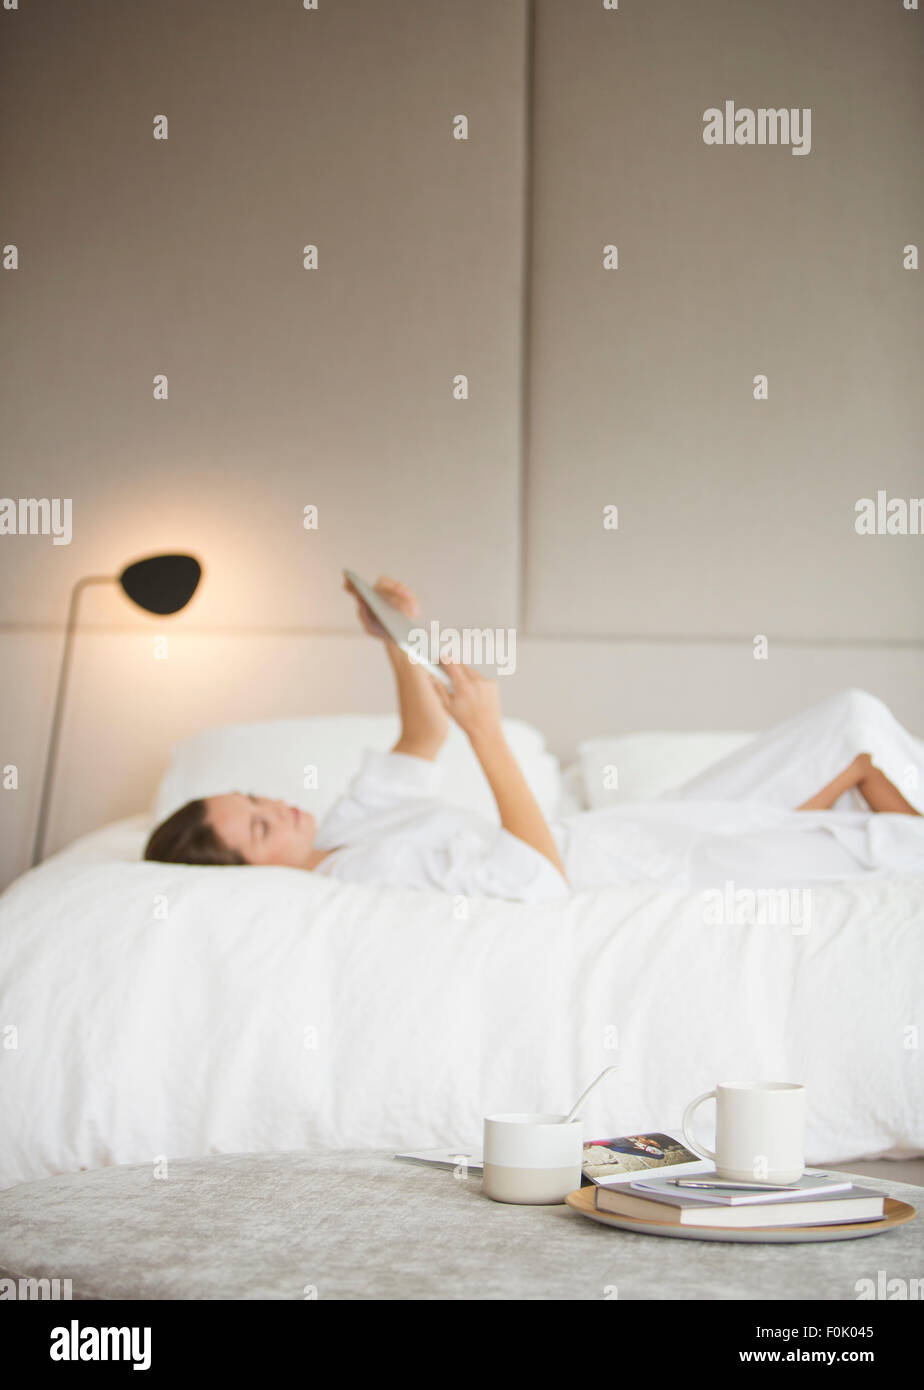 Woman in bathrobe laying on bed using digital tablet Stock Photo